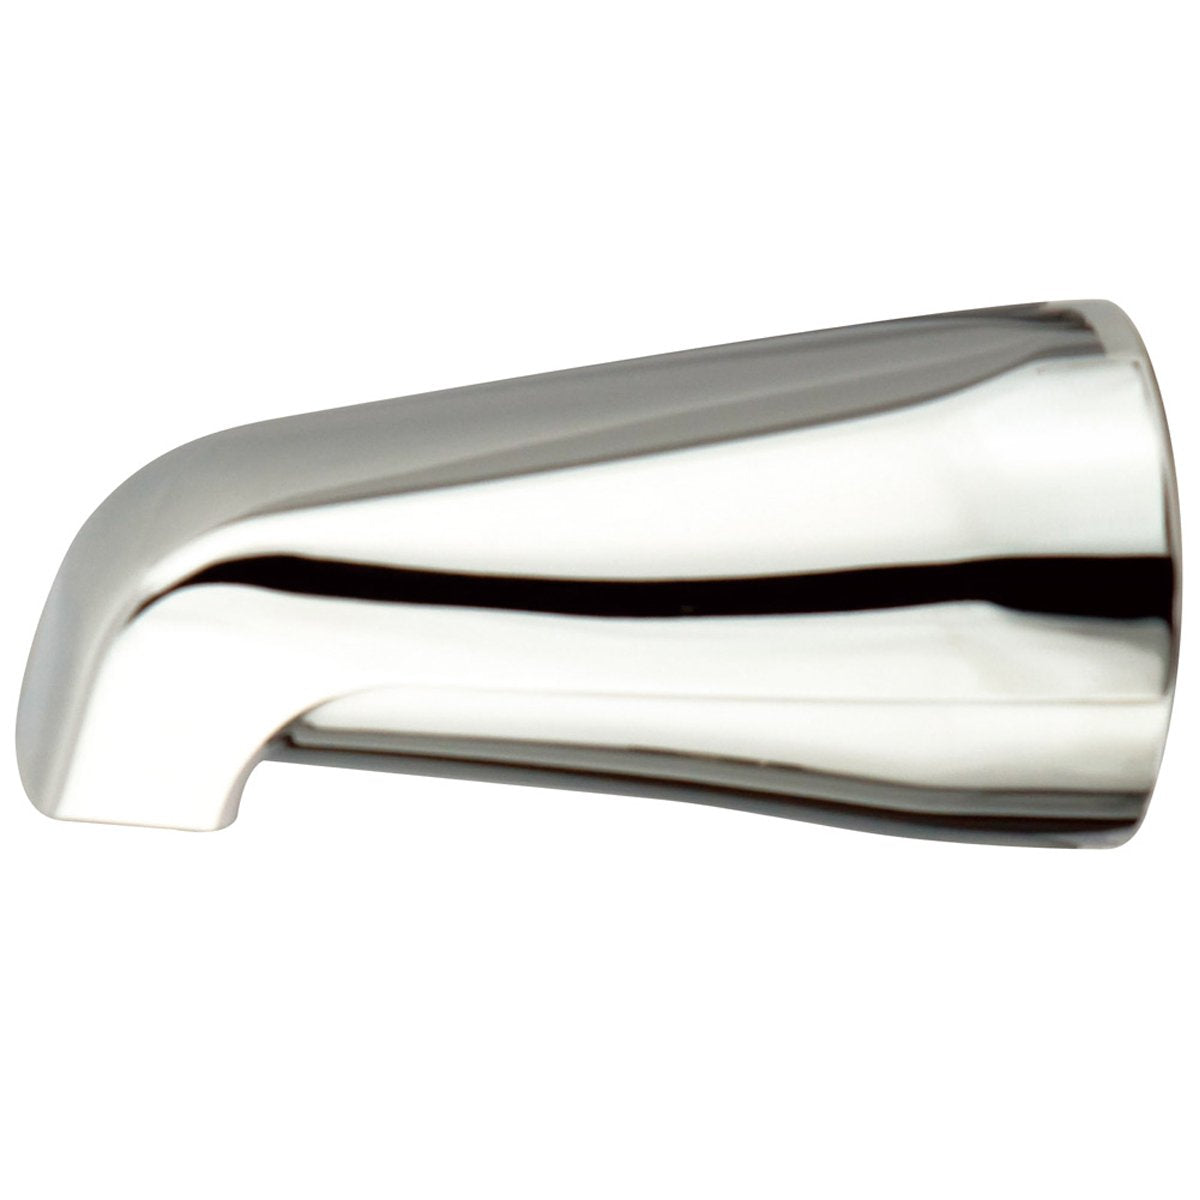 Kingston Brass Made to Match 5" Tub Spout-Bathroom Accessories-Free Shipping-Directsinks.